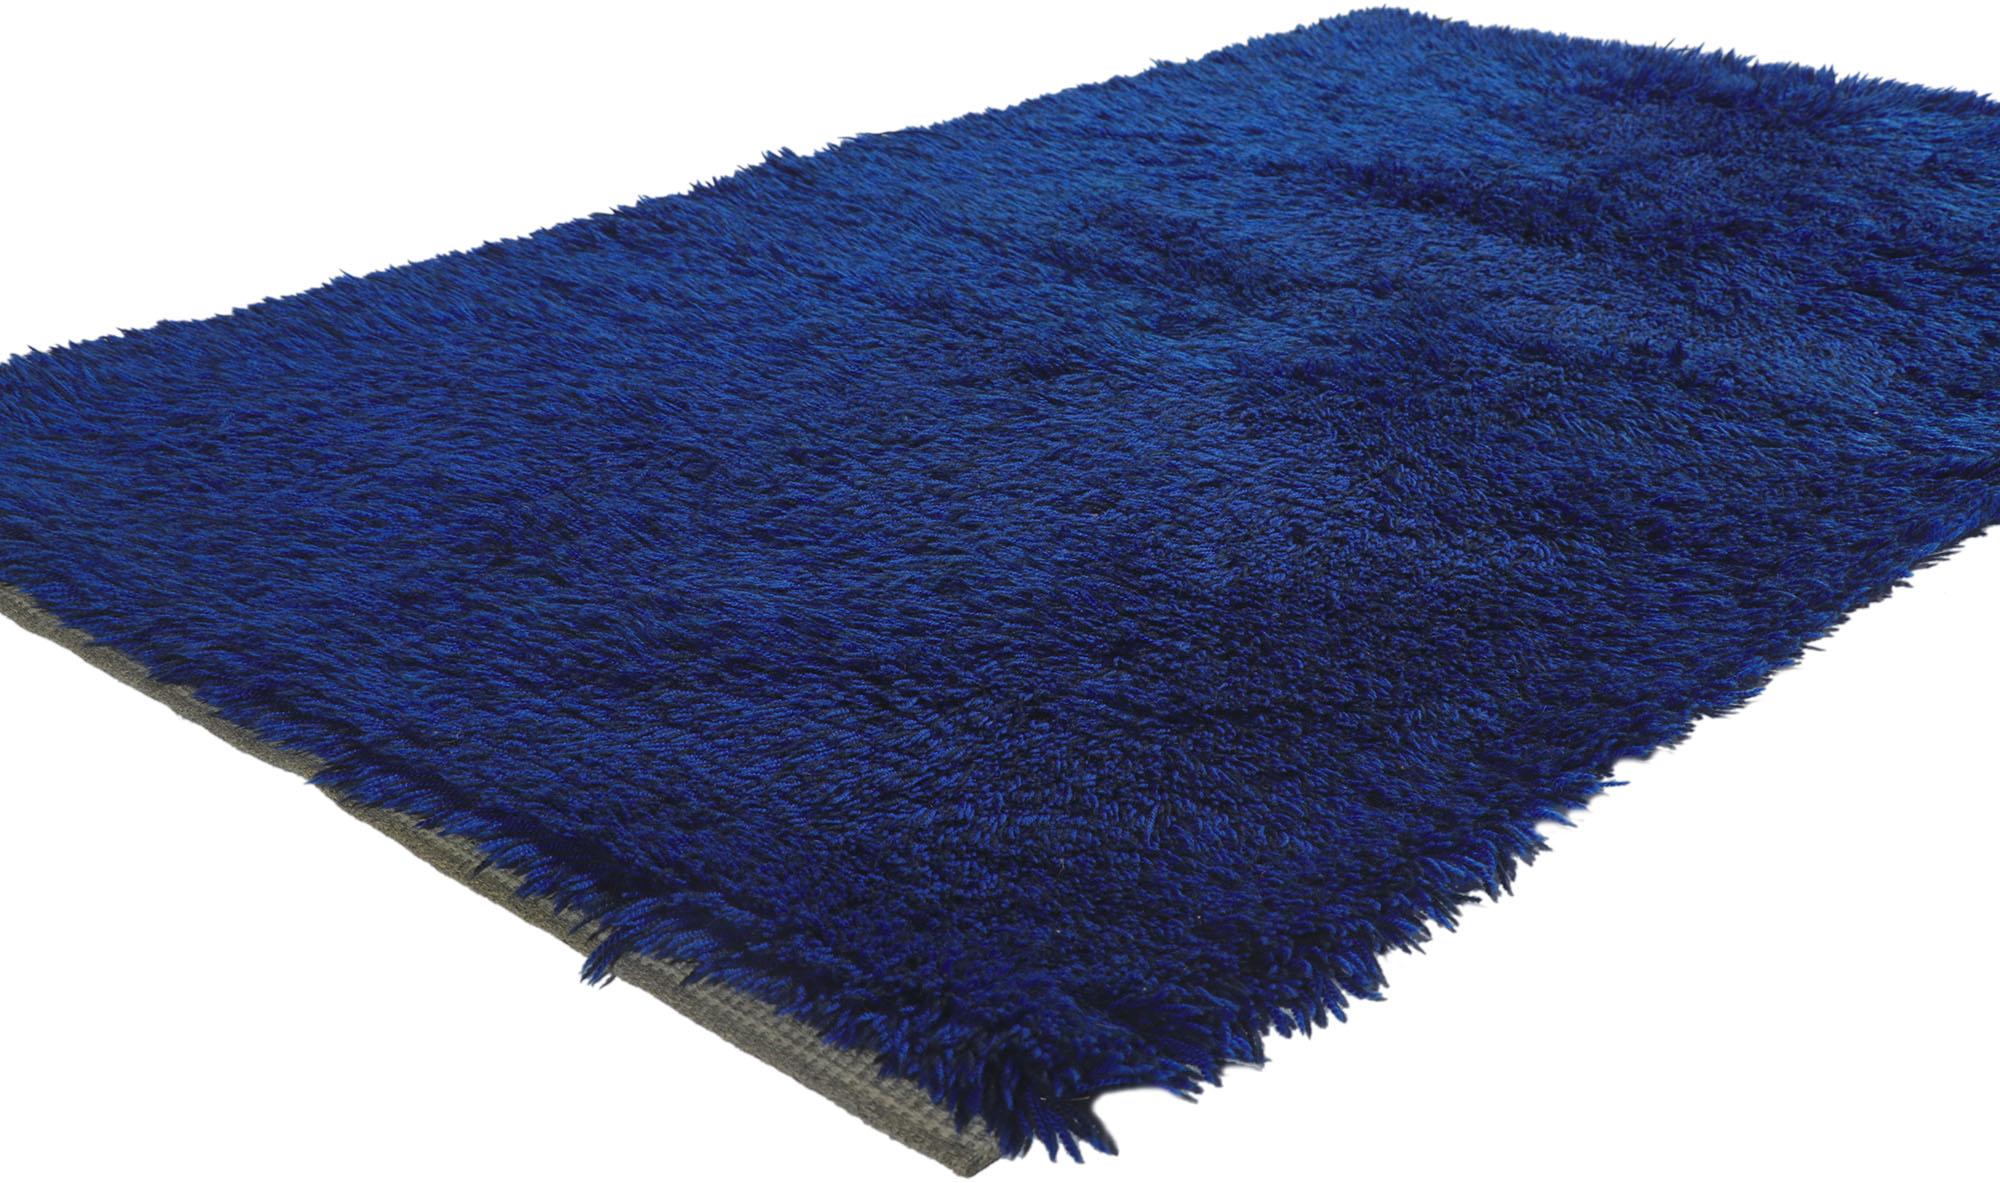 78274 Vintage Swedish Rya Rug with Scandinavian Modern Style 03'09 x 05'07. With its simplicity, plush pile and Scandinavian Modern style, this hand-knotted wool vintage Swedish Ryijy Rya rug is a captivating vision of woven beauty. Imbued with blue